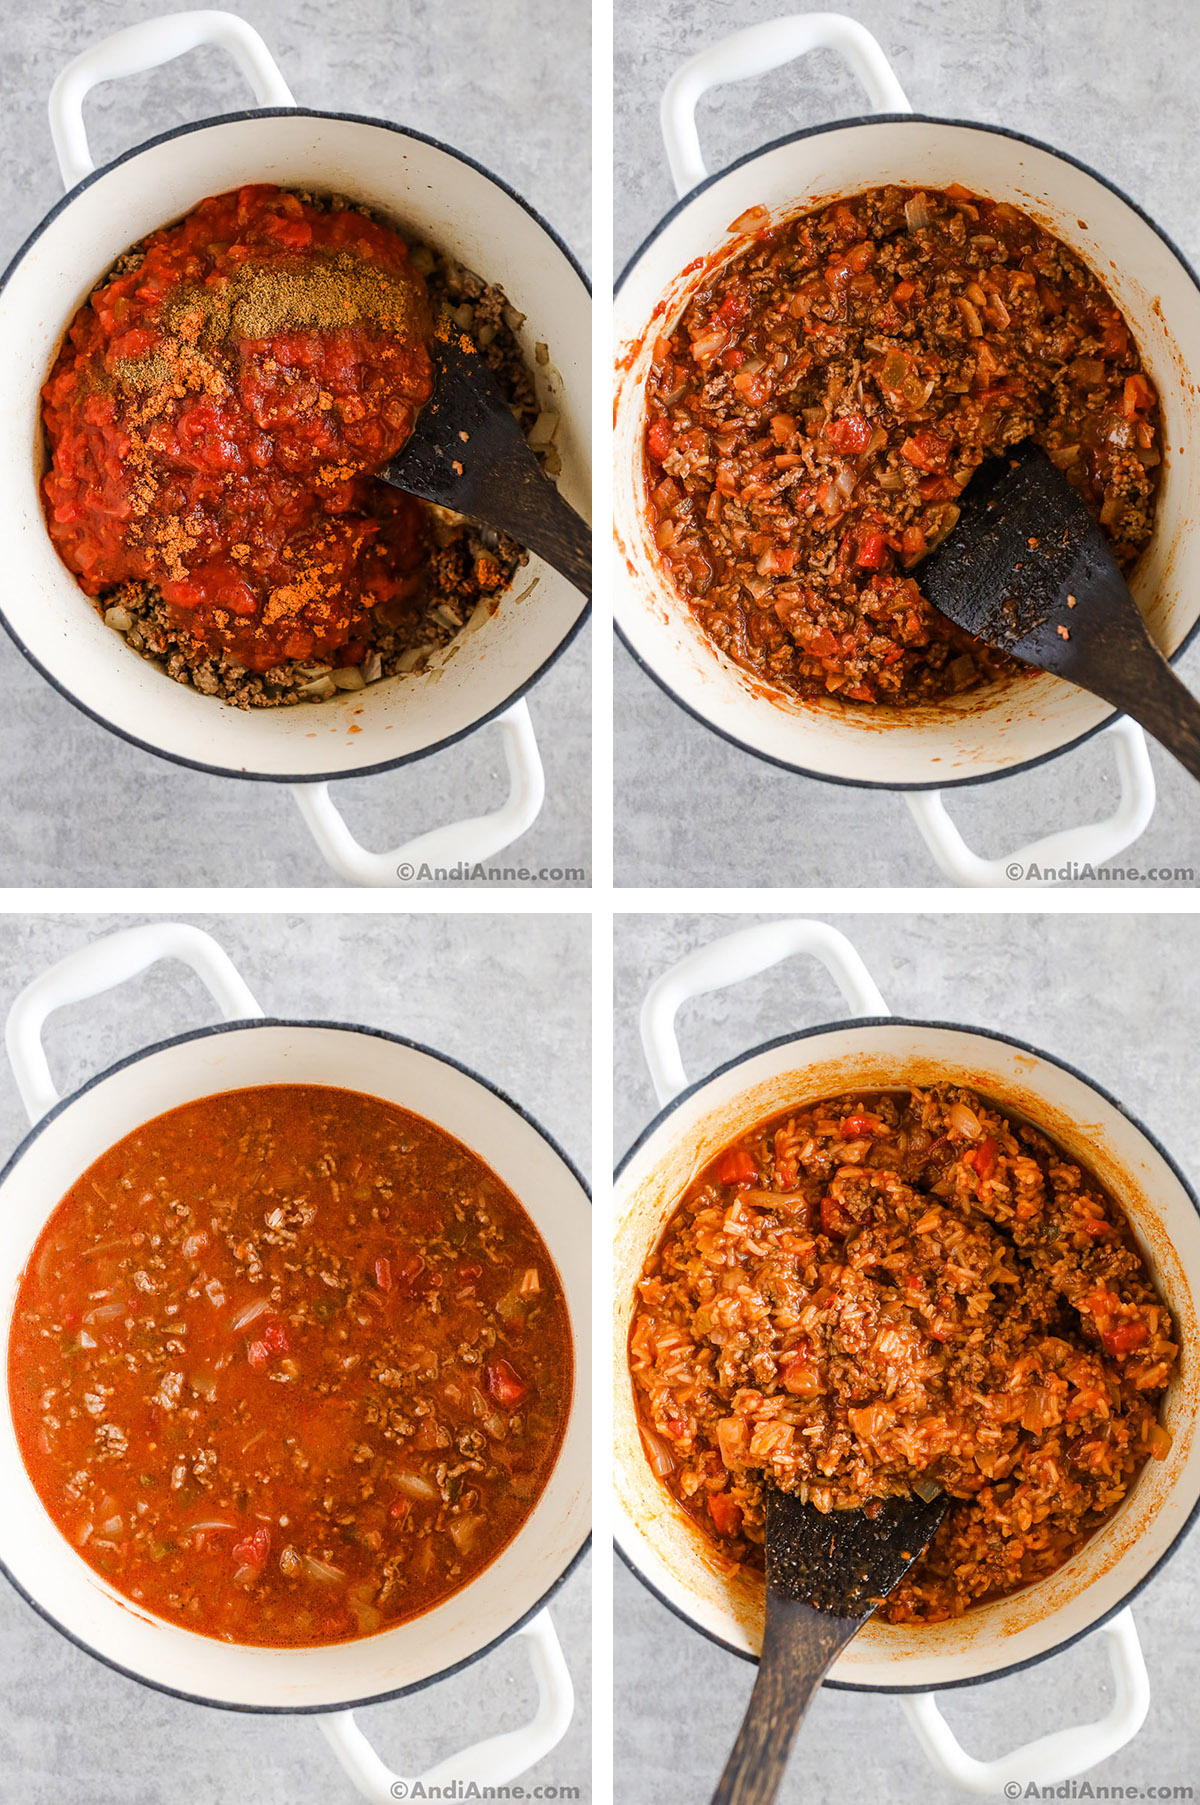 Four images of a pot with ground beef rice mixture with tomato sauce in various cooking stages